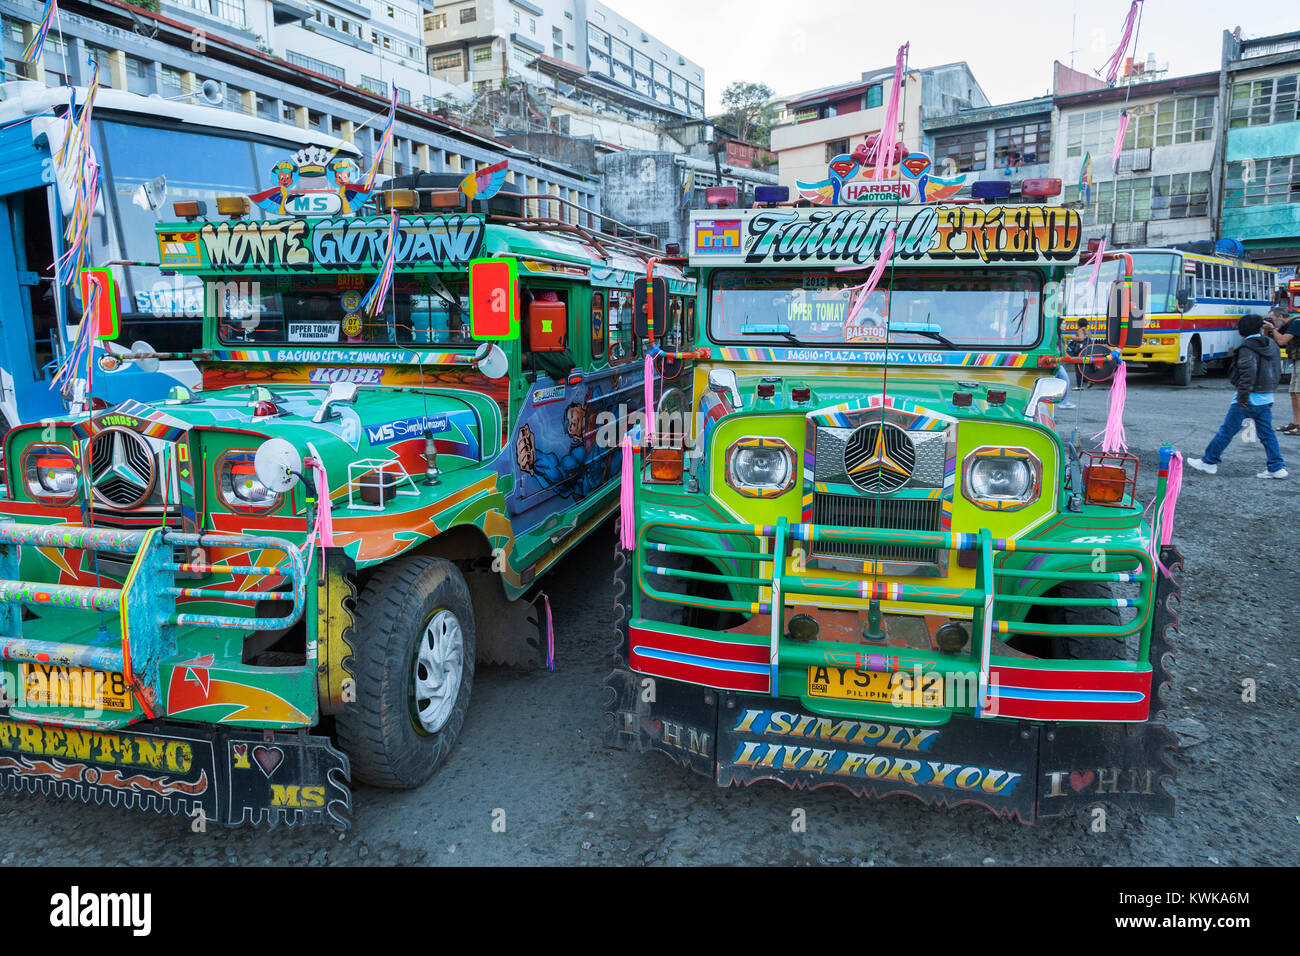 Jeepneys public transport from Philippines Stock Photo